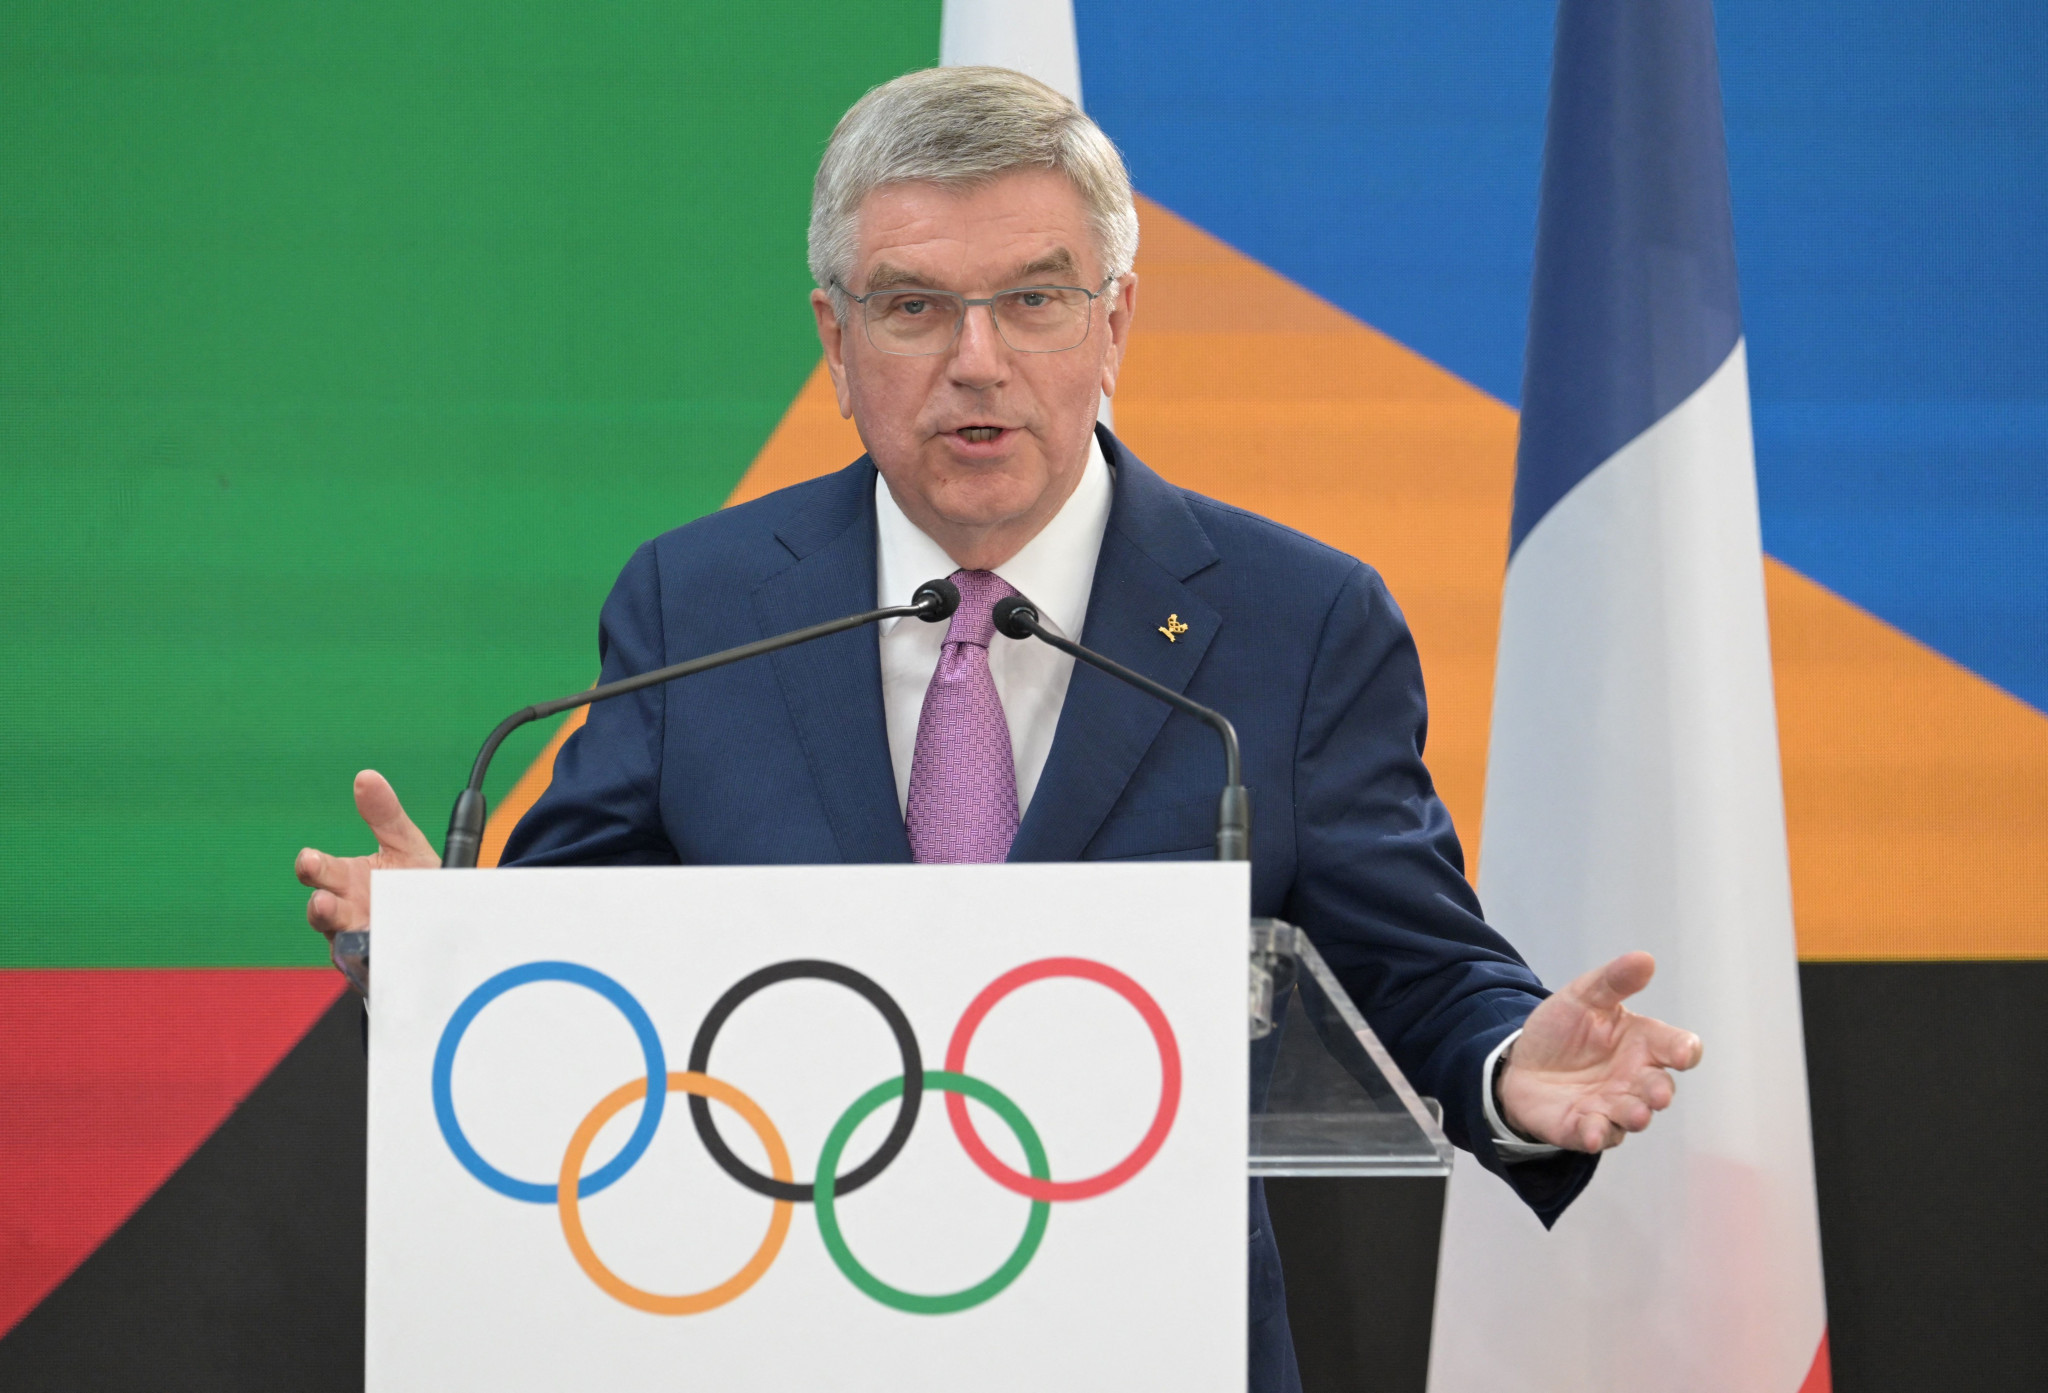 
The philosophical attitude of IOC President Thomas Bach argues that athletes are neutral, seeking integration and friendship, immune from Government war-mongery ©Getty Images